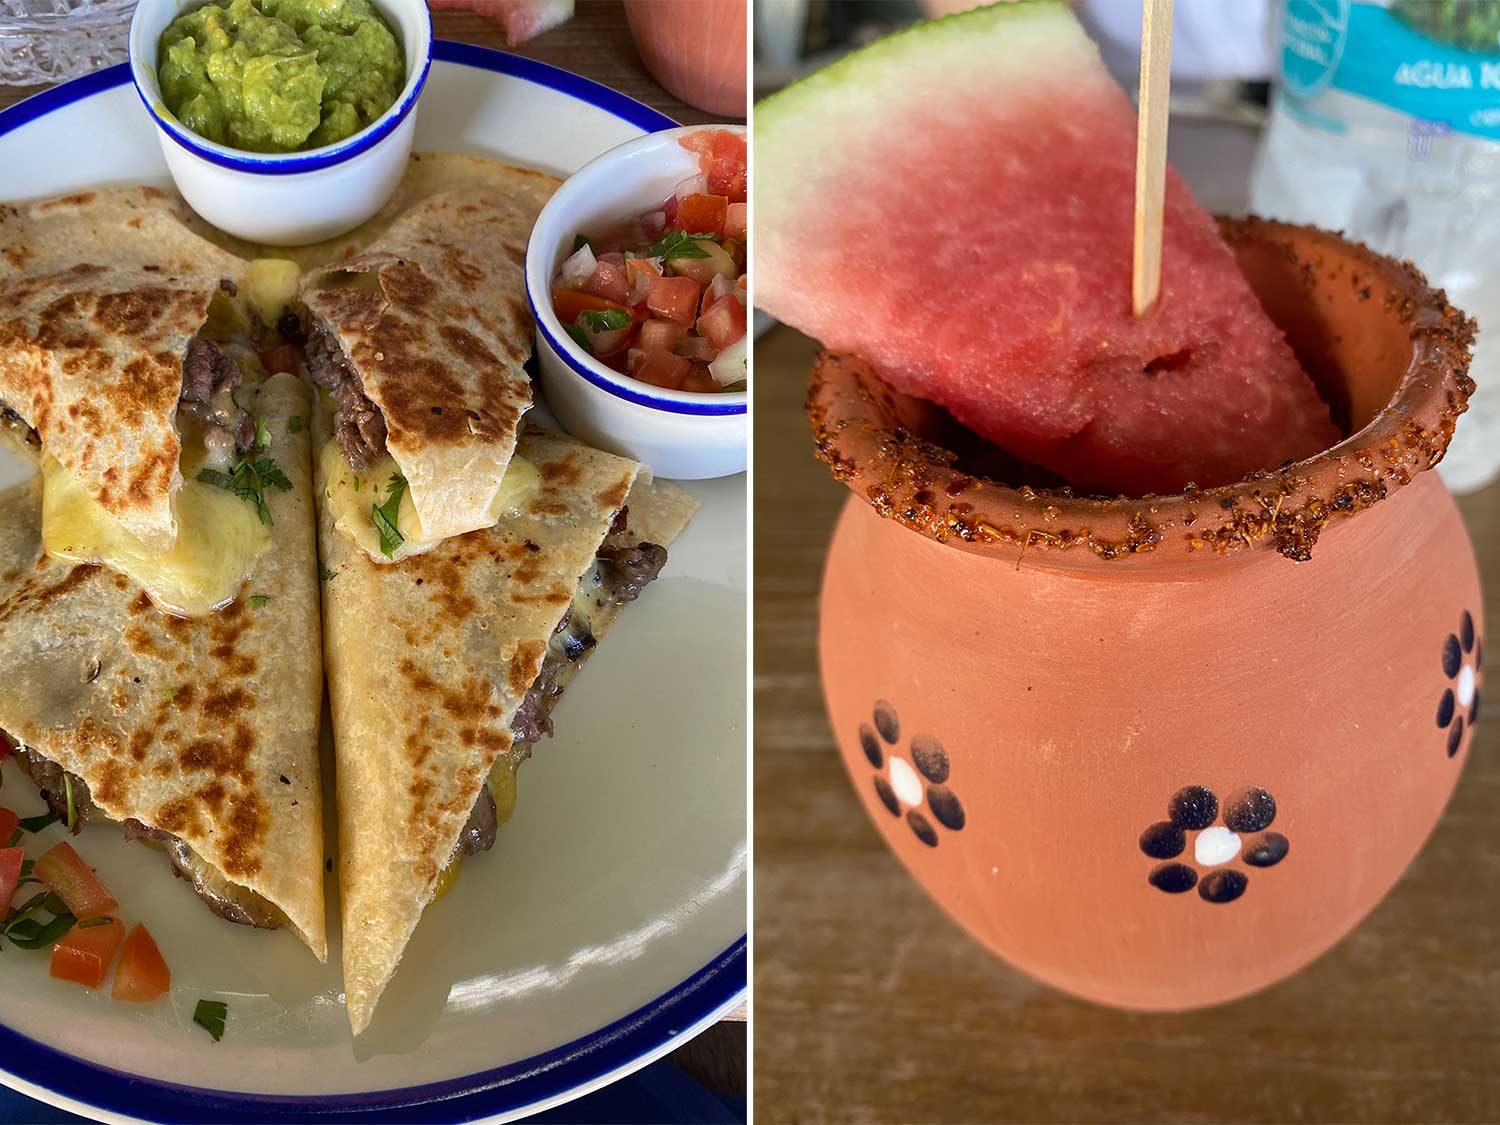 A plate of quesadillas next to a watermelon cocktail at Marriot Cancun Resort.